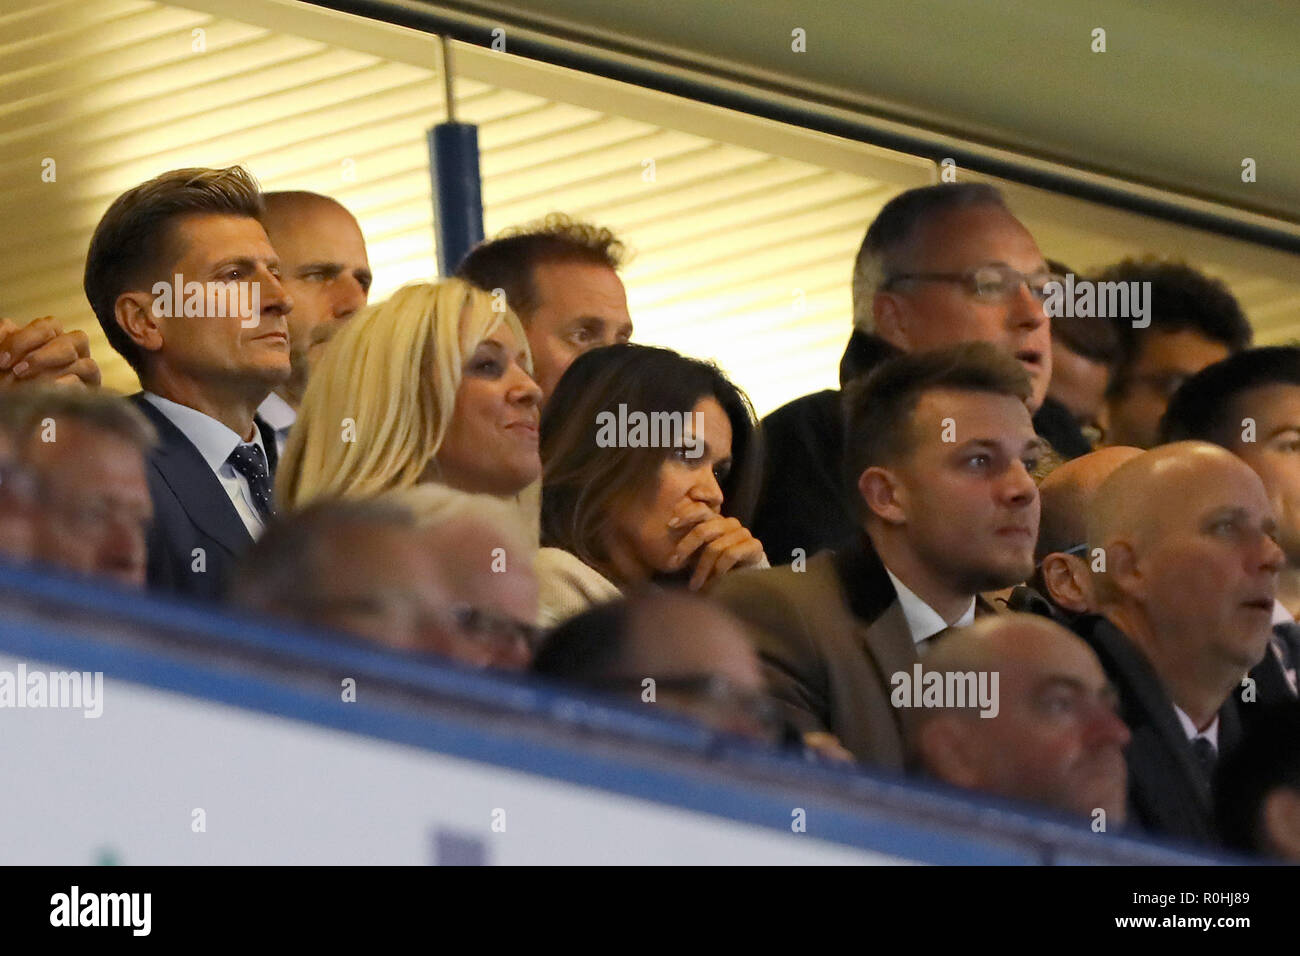 TV Presenter, Susanna Reid watches with Crystal Palace chairman Steve Parish - Chelsea v Crystal Palace, Premier League, Stamford Bridge, London - 4th November 2018  STRICTLY EDITORIAL USE ONLY - DataCo rules apply - The use of this image in a commercial context is strictly prohibited unless express permission has been given by the club(s) concerned. Examples of commercial usage include, but are not limited to, use in betting and gaming, marketing and advertising products. No use with unauthorised audio, video, data, fixture lists, club and or league logos or services including those listed as Stock Photo